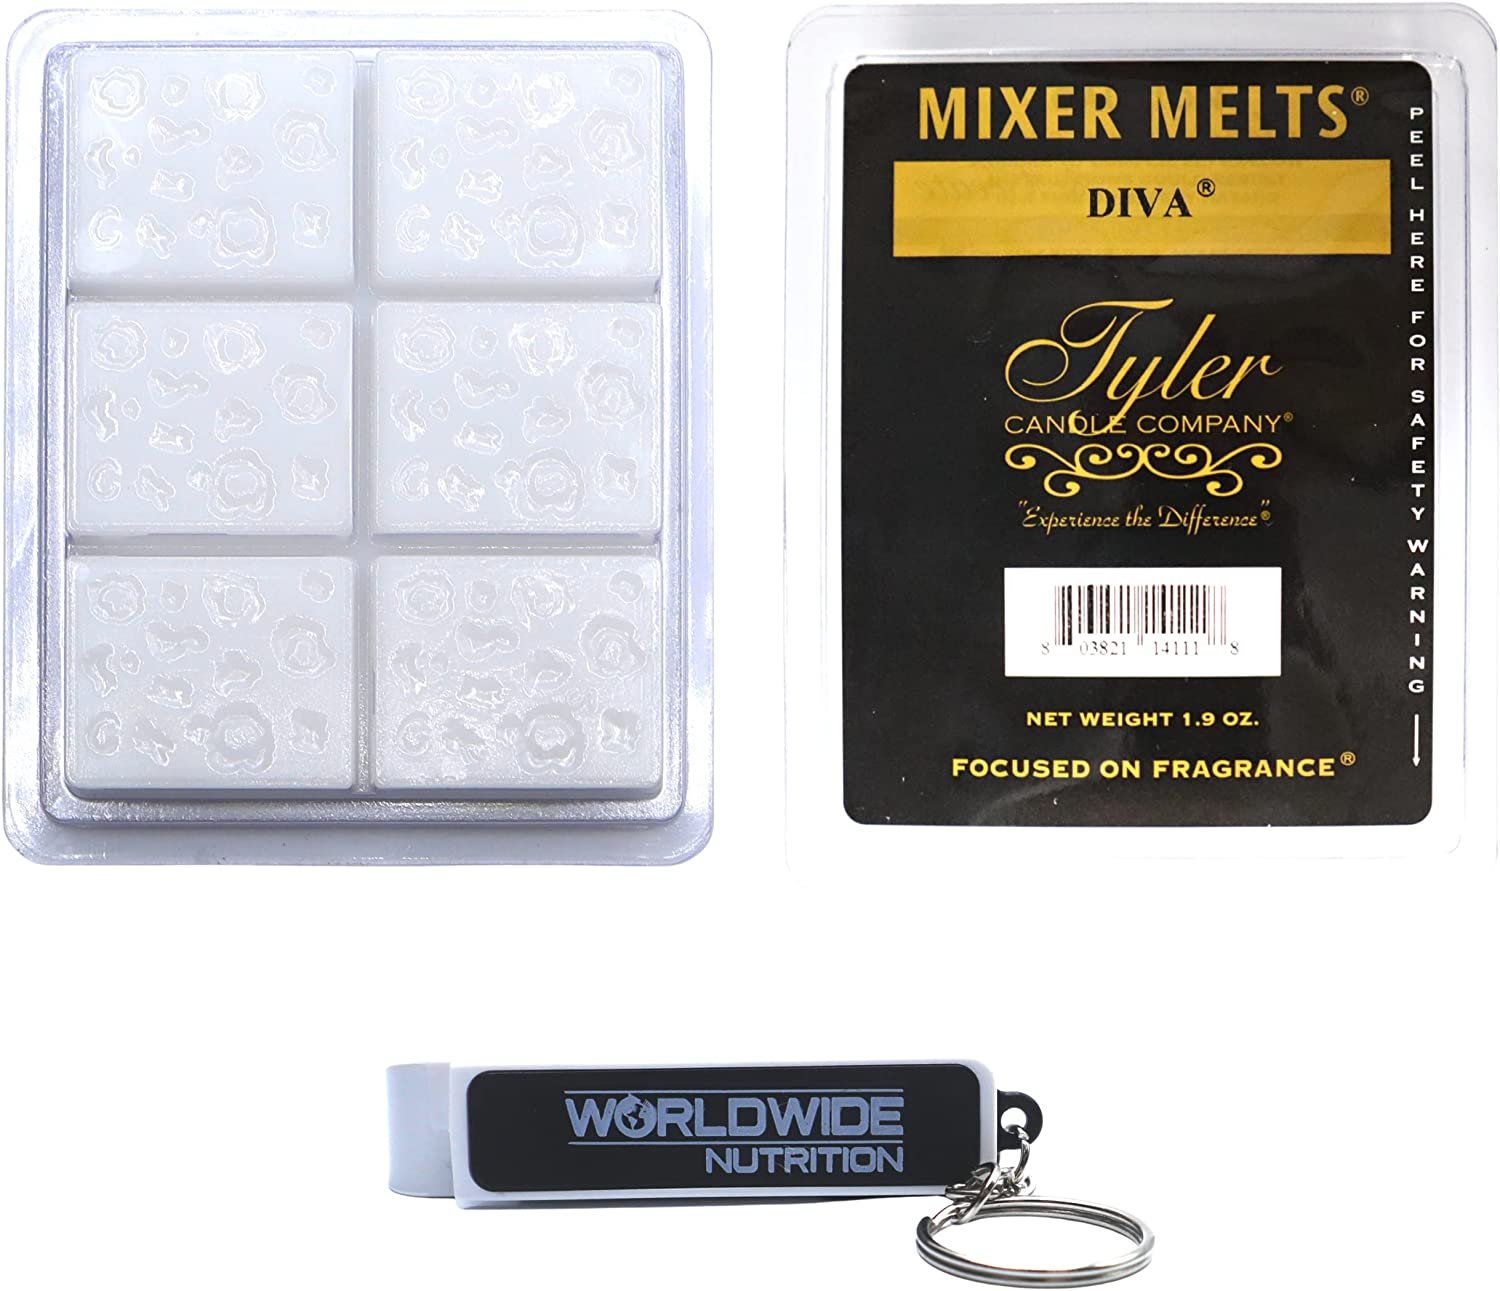 Tyler Candle Company Diva Scent Wax Melts - Scented Mixer Melts with  Essential Oils for Wax Warmer - Box of 14, 6 Bars per with Worldwide  Nutrition